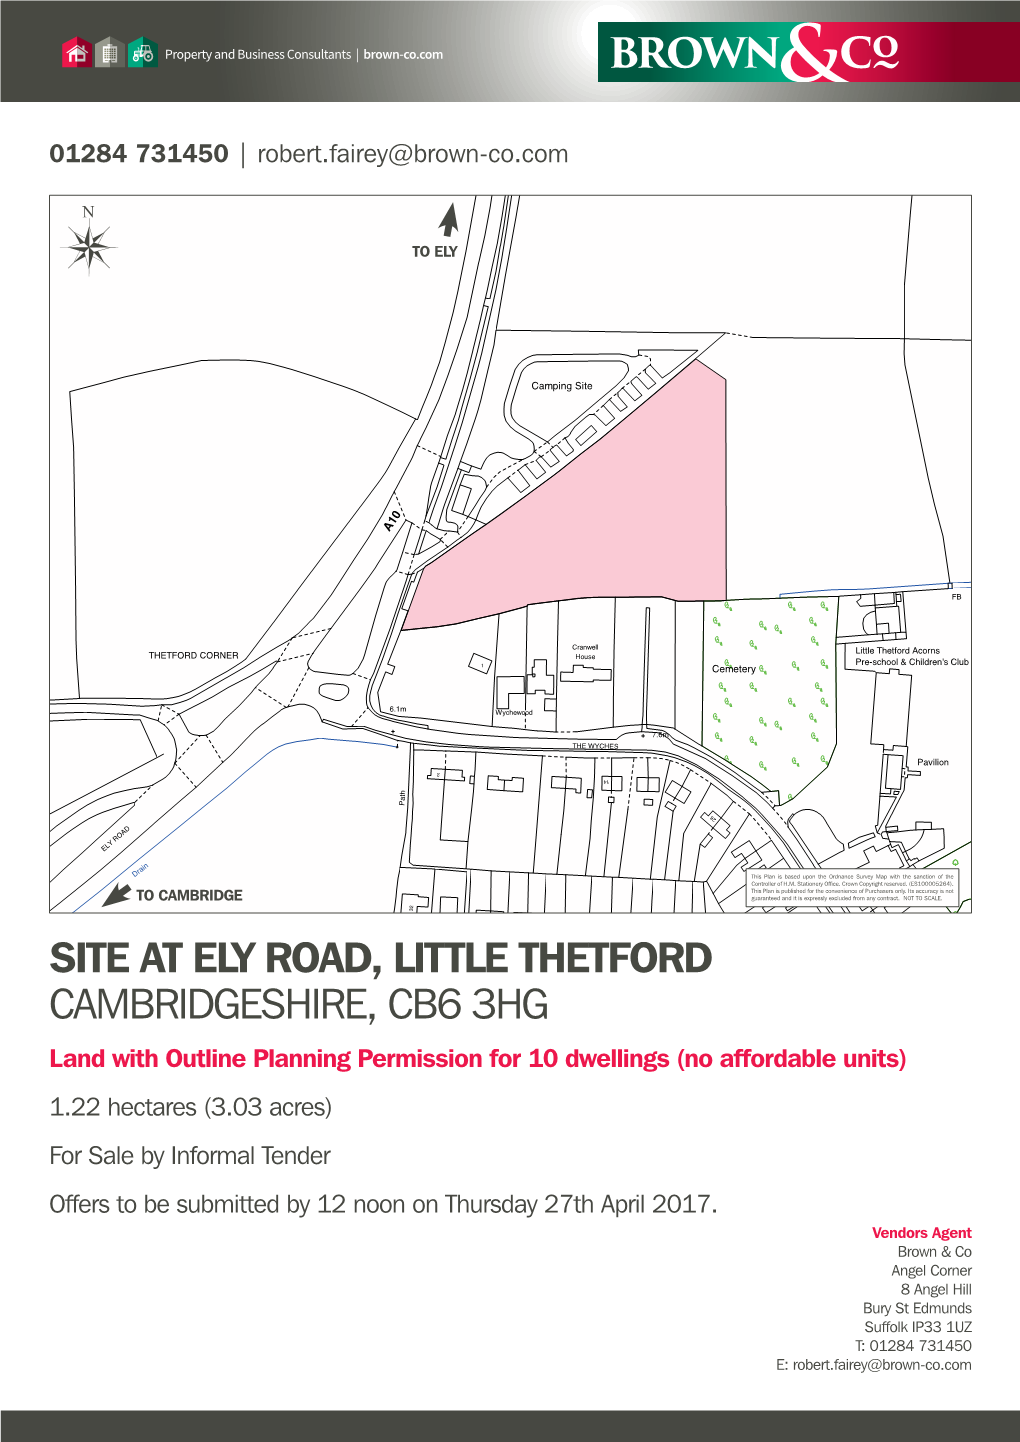 Site at Ely Road, Little Thetford Cambridgeshire